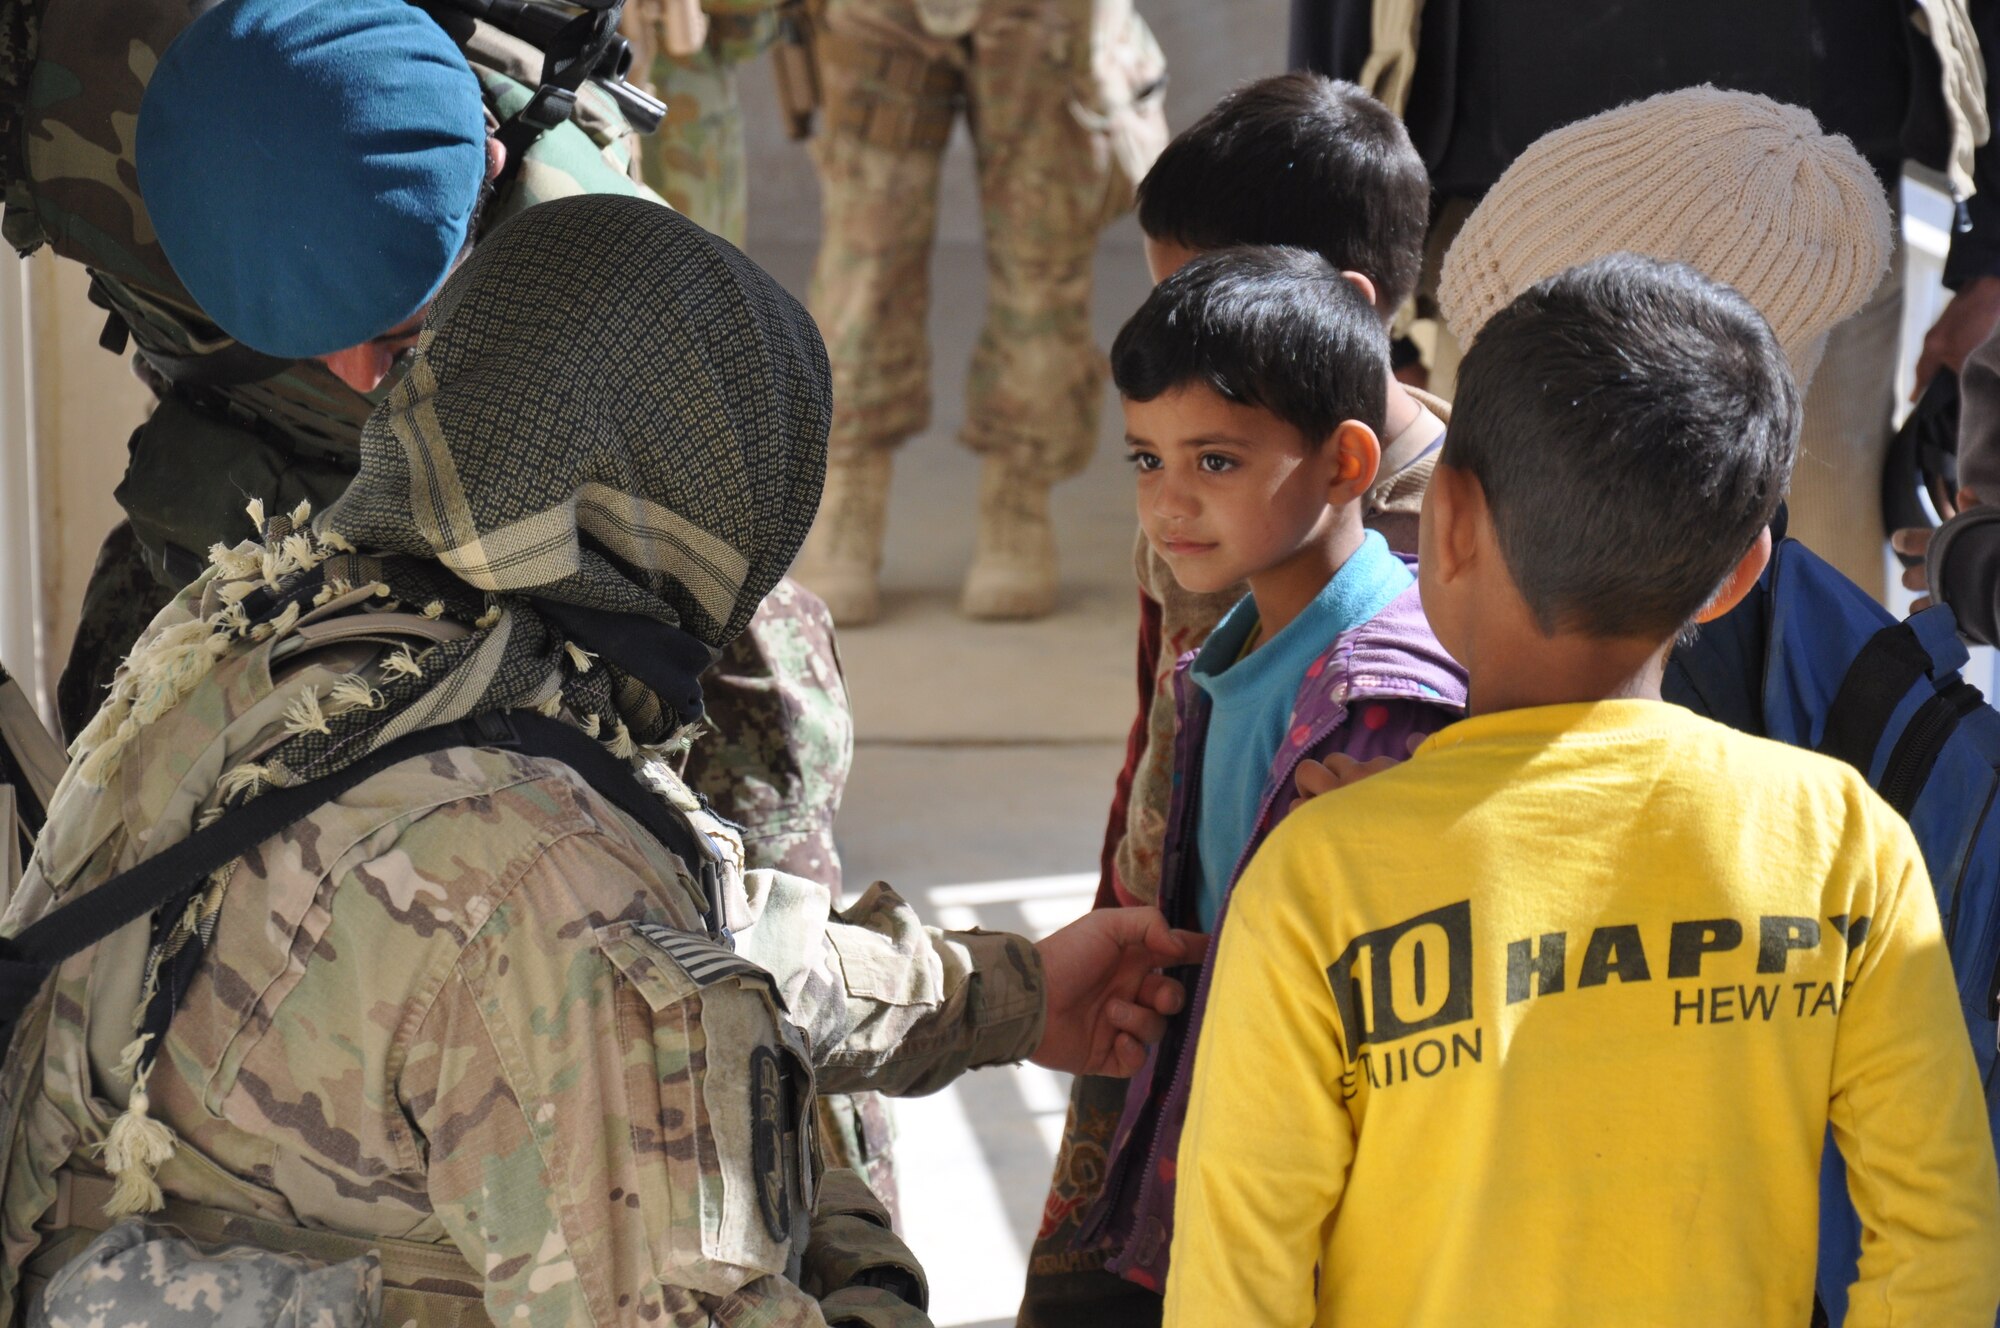 Airman 1st Class Jessica Humke, a security forces Airman with Flightline Security at Kandahar Airfield, talks to an Afghan boy at a school near KAF on Jan. 24. Afghan Air Force security forces airmen led a mission to deliver supplies to the school, which was carried out with logistical and security support from Coalition forces. (U.S. Air Force photo/Capt. Tristan Hinderliter)